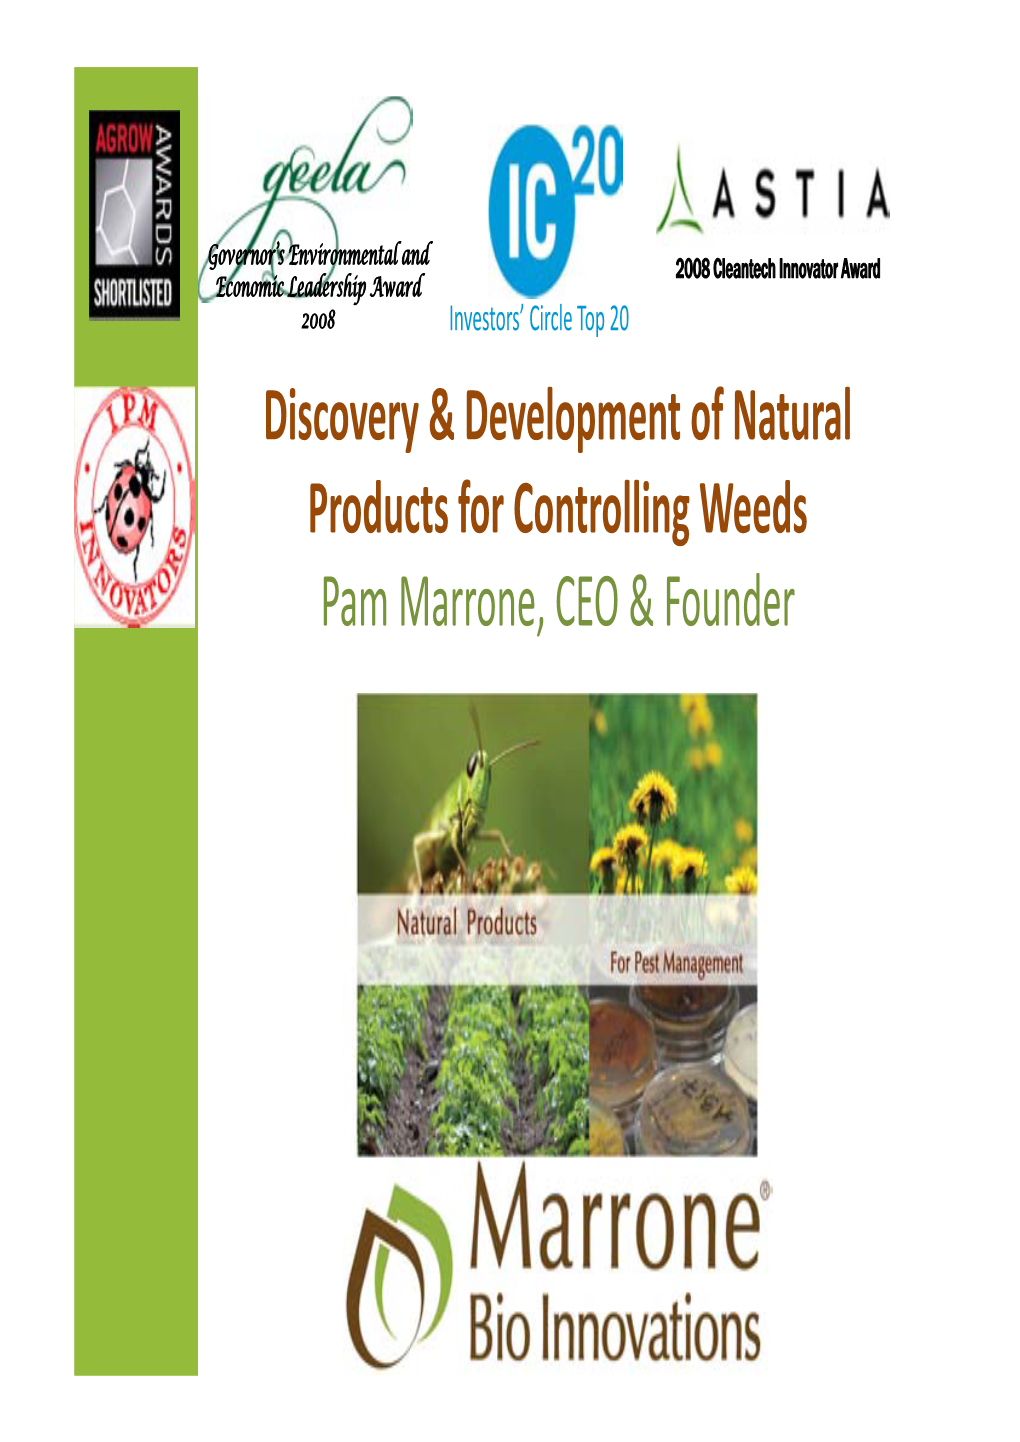 Discovery & Development of Natural Products for Controlling Weeds